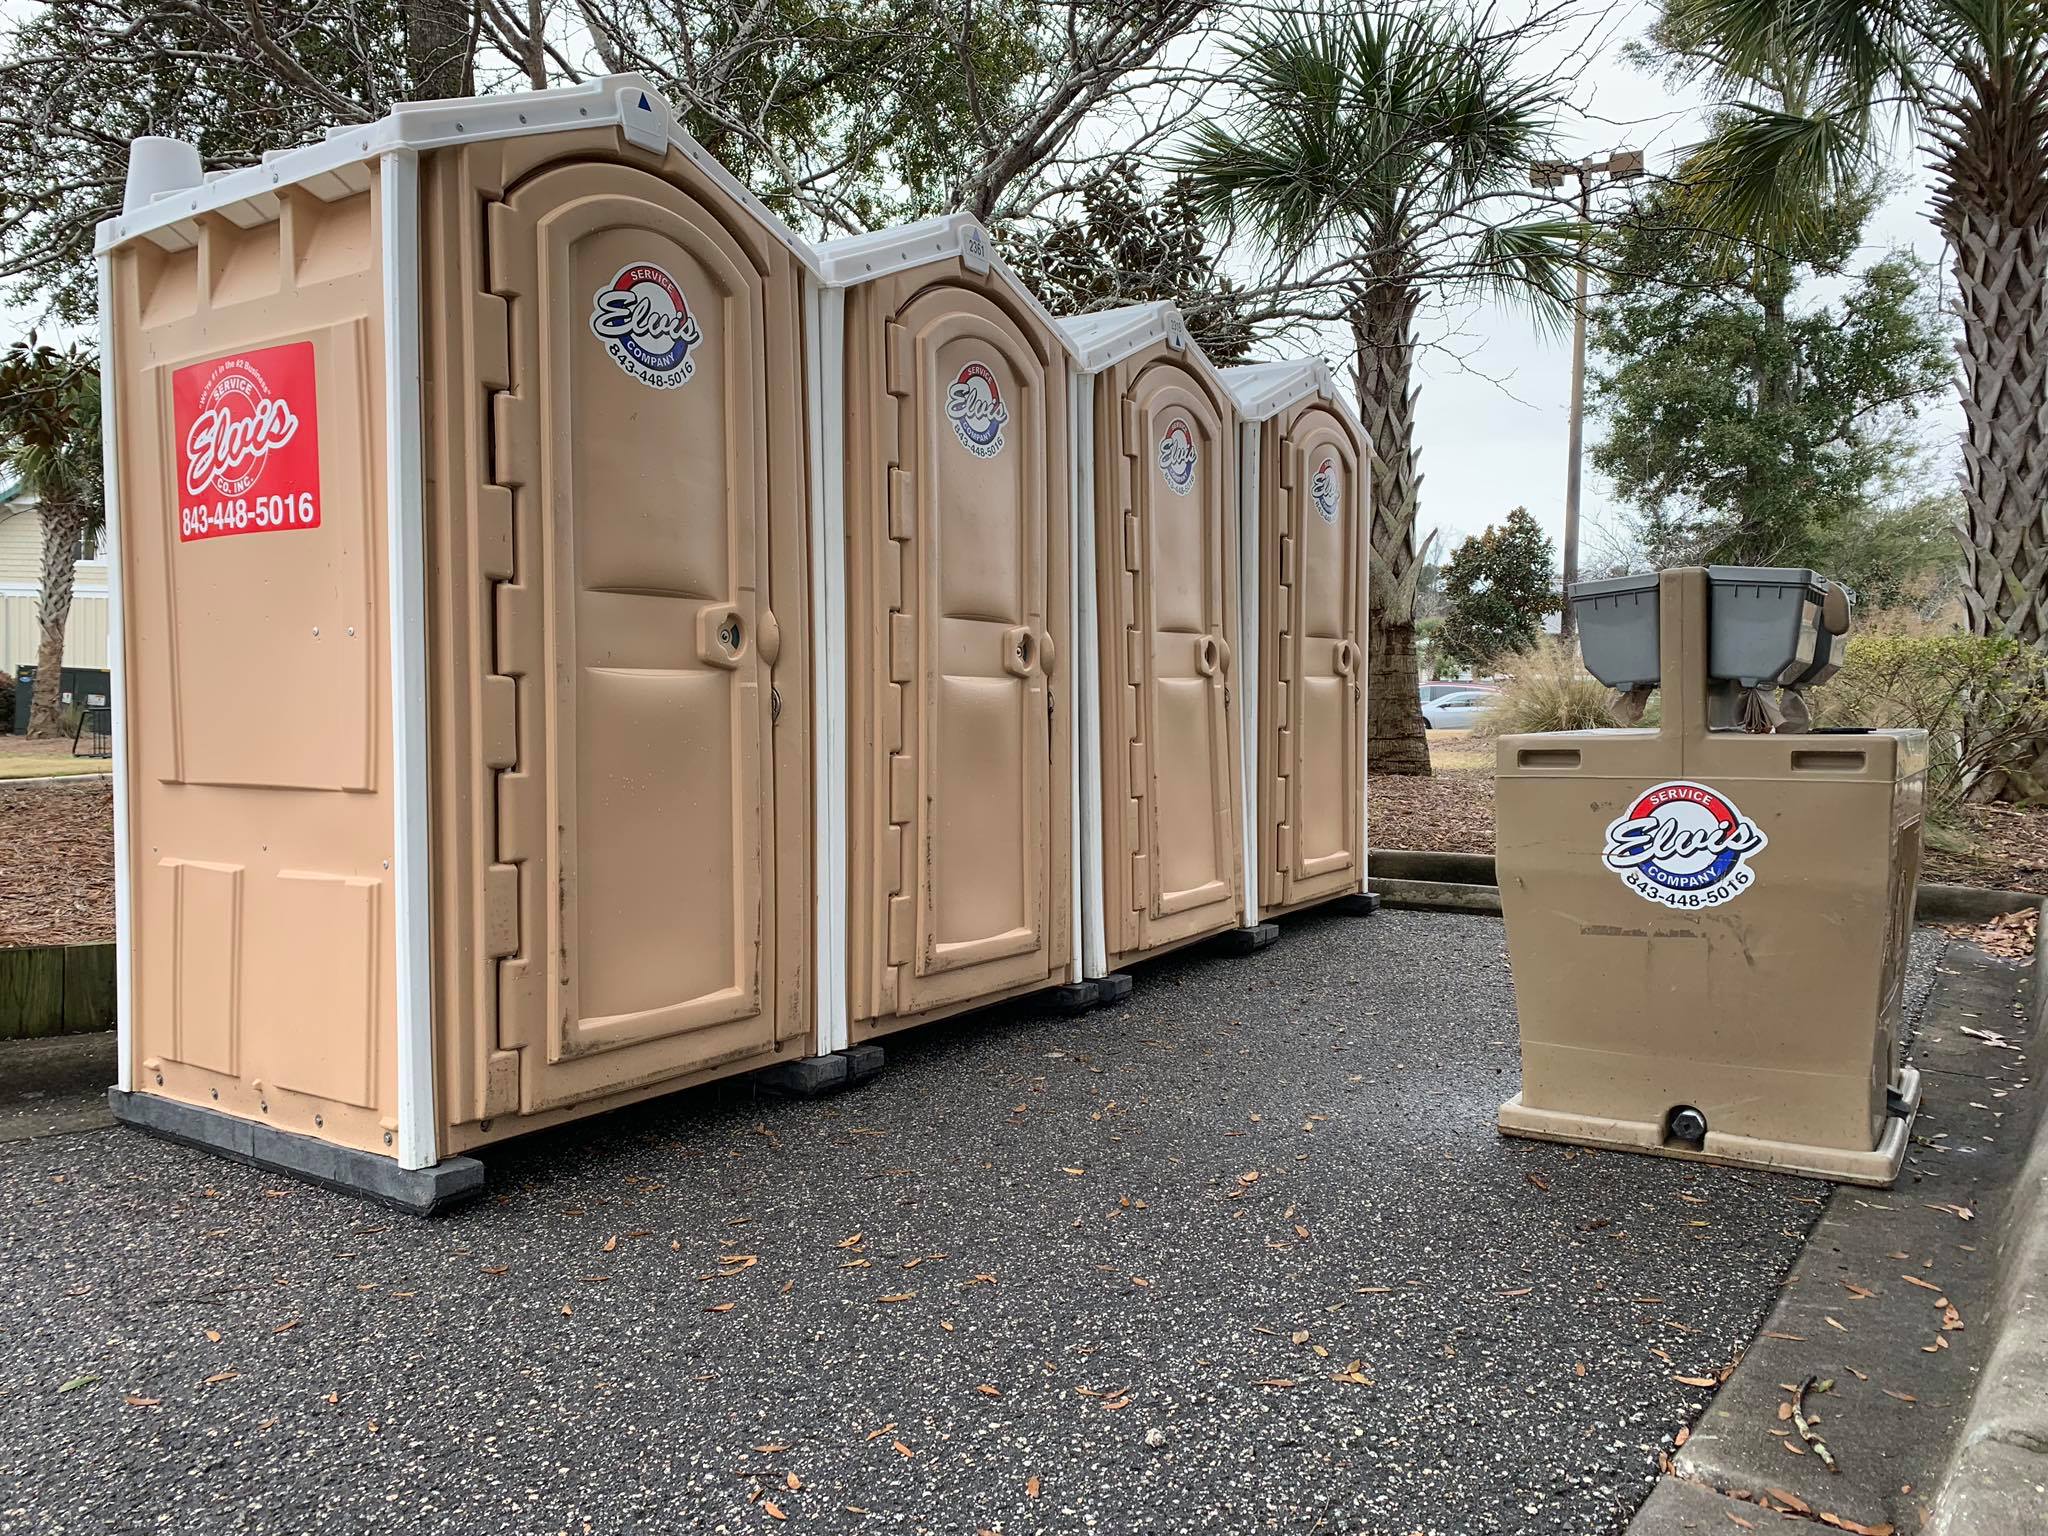 Debunking Common Myths About Portable Restrooms